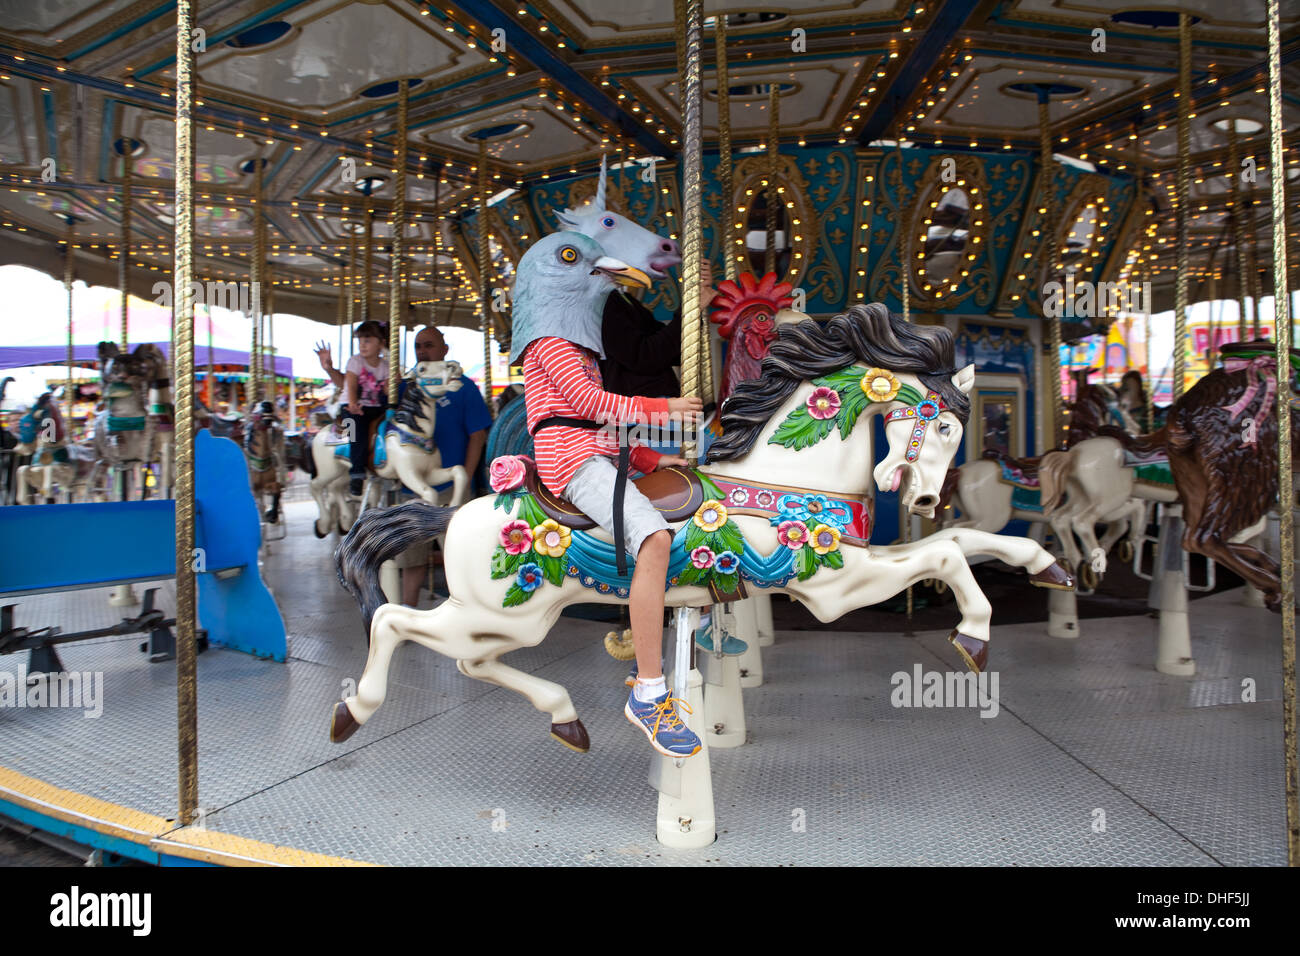 Children wearing animal masks riding on a carousel ride at state fair. Stock Photo